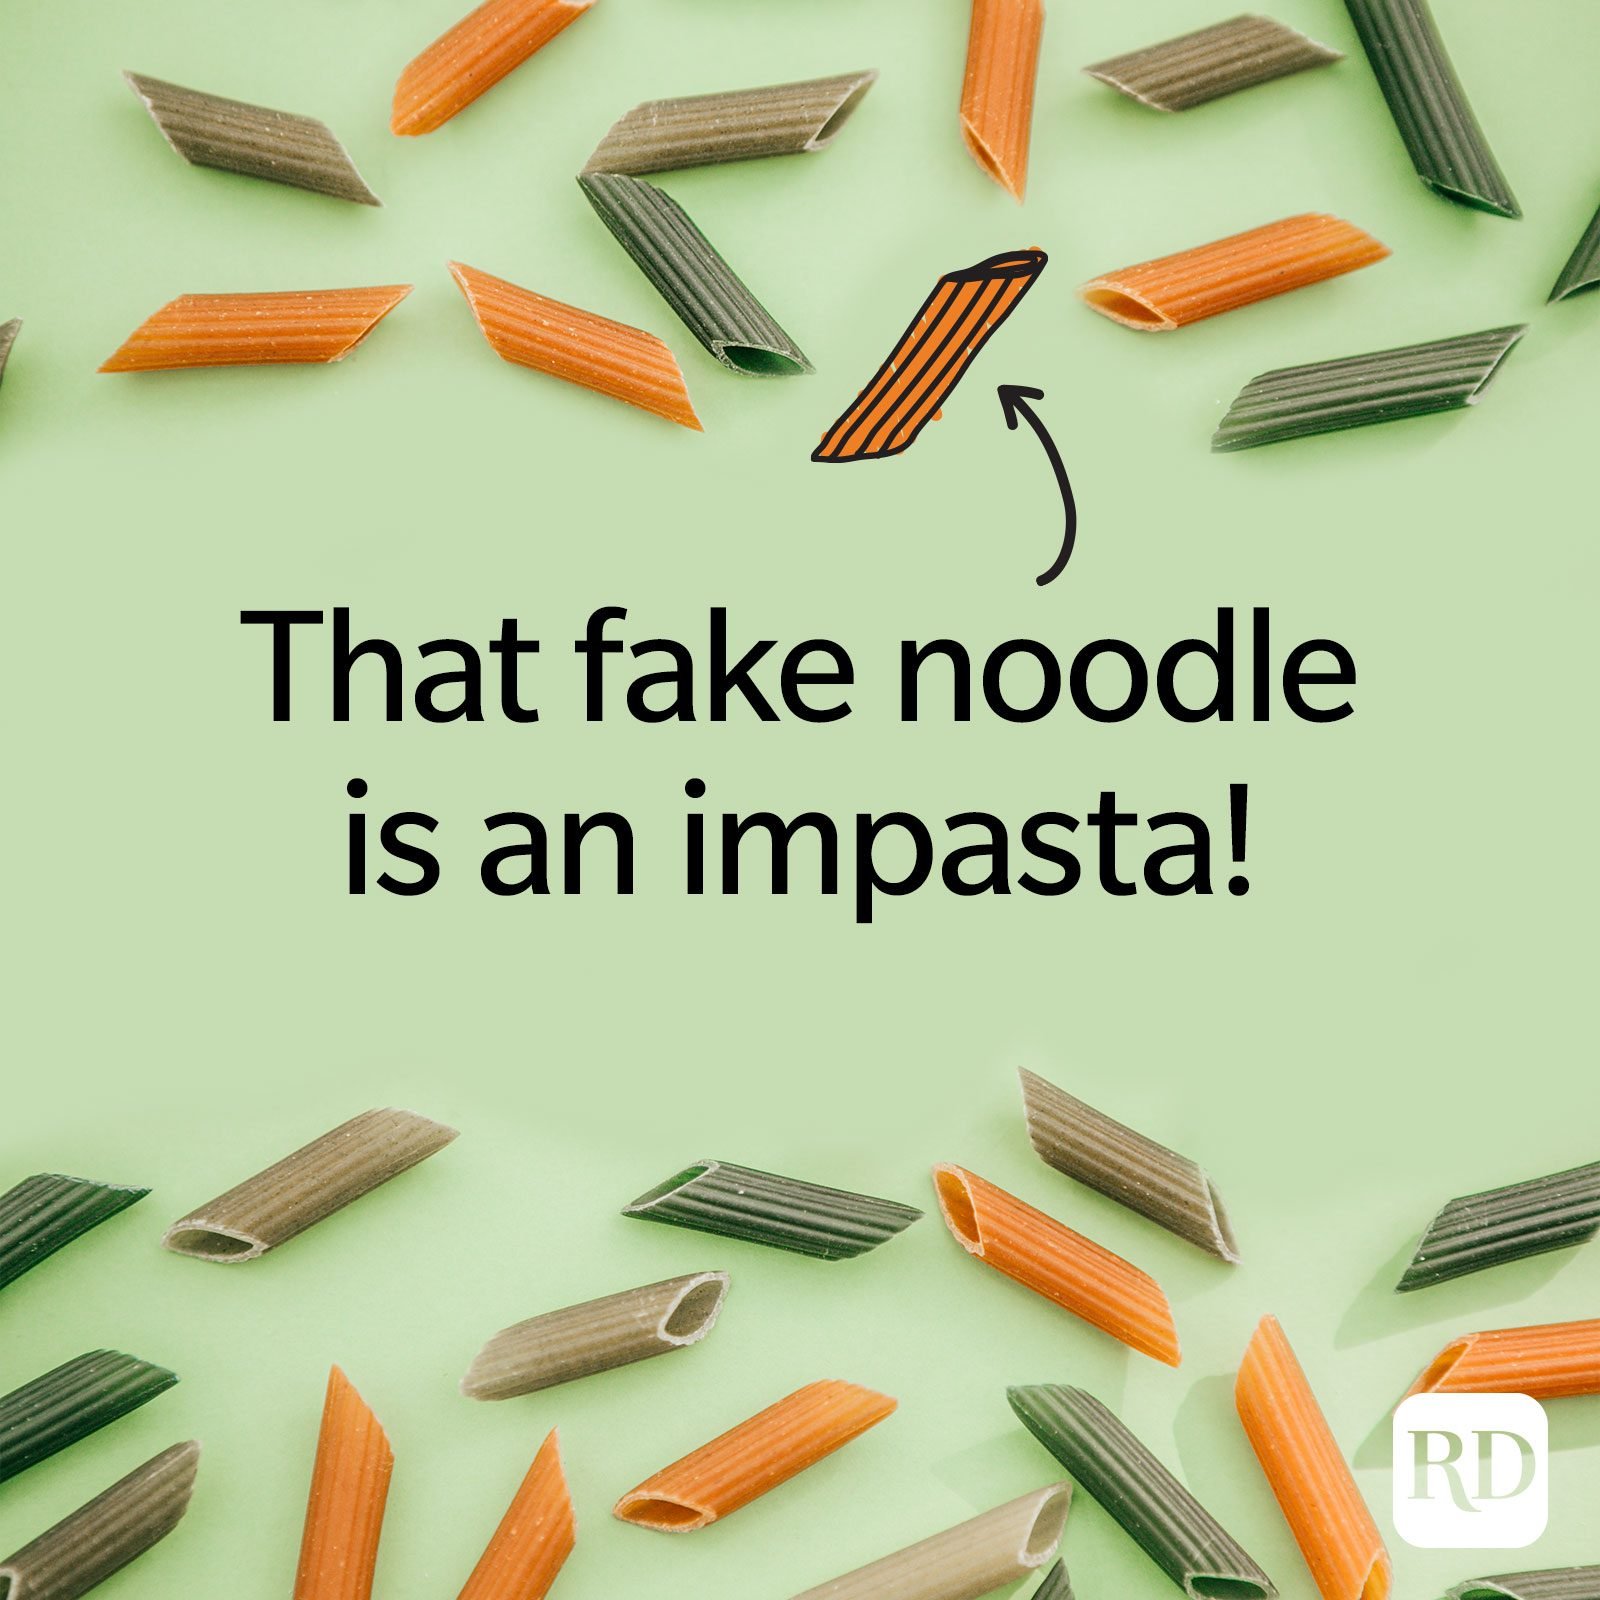 50 Pasta Puns That Are Pasta-tively Amazing | Reader's Digest